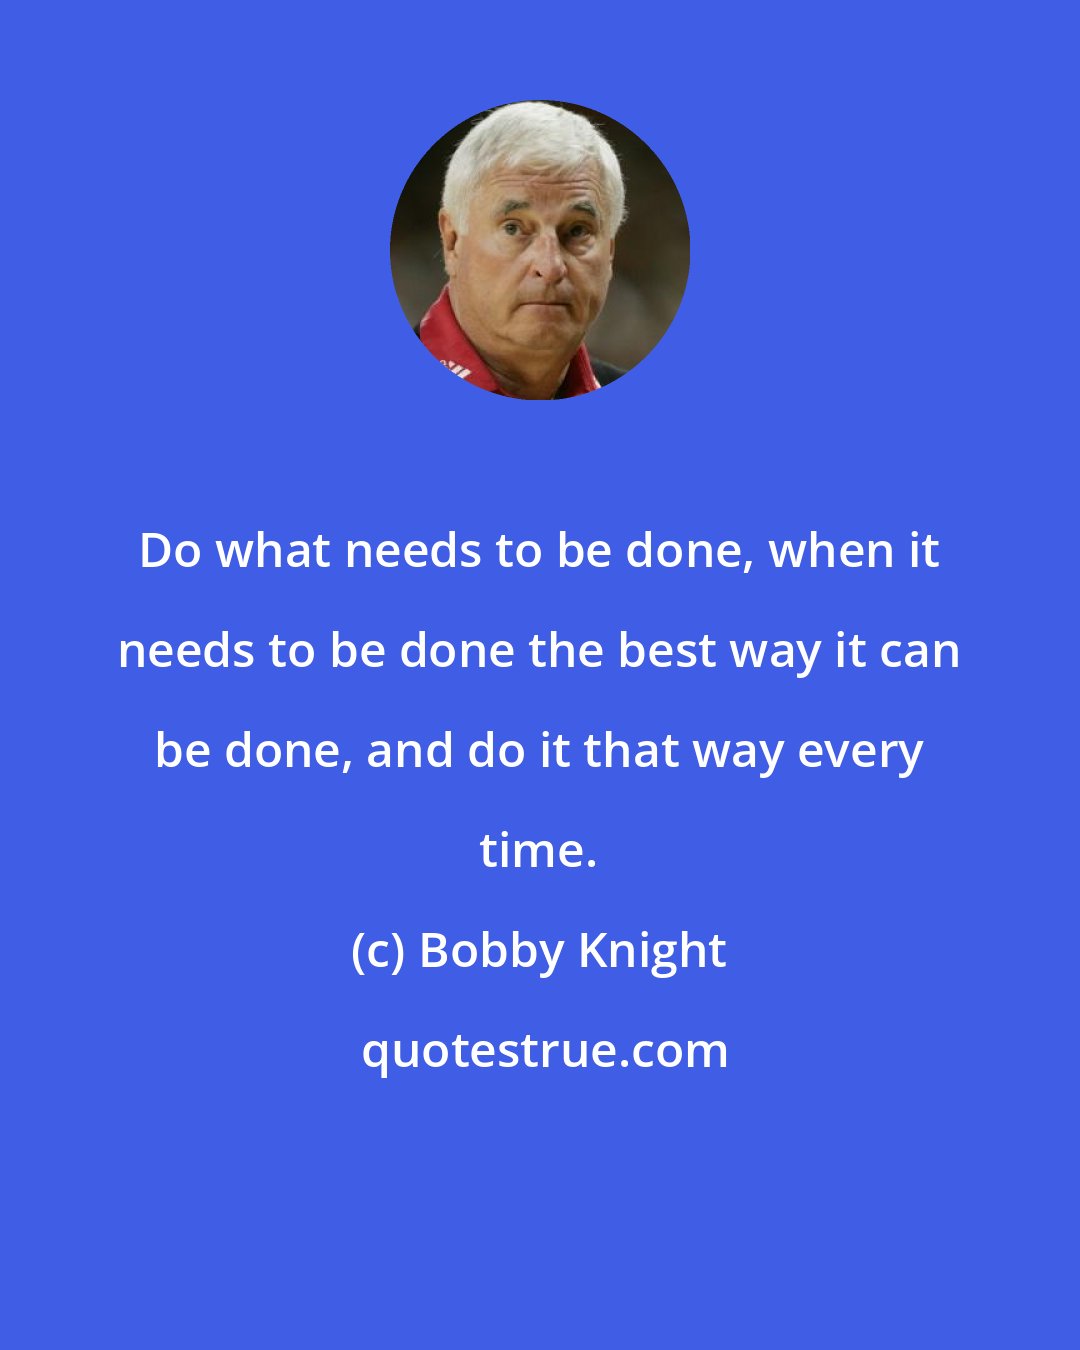 Bobby Knight: Do what needs to be done, when it needs to be done the best way it can be done, and do it that way every time.